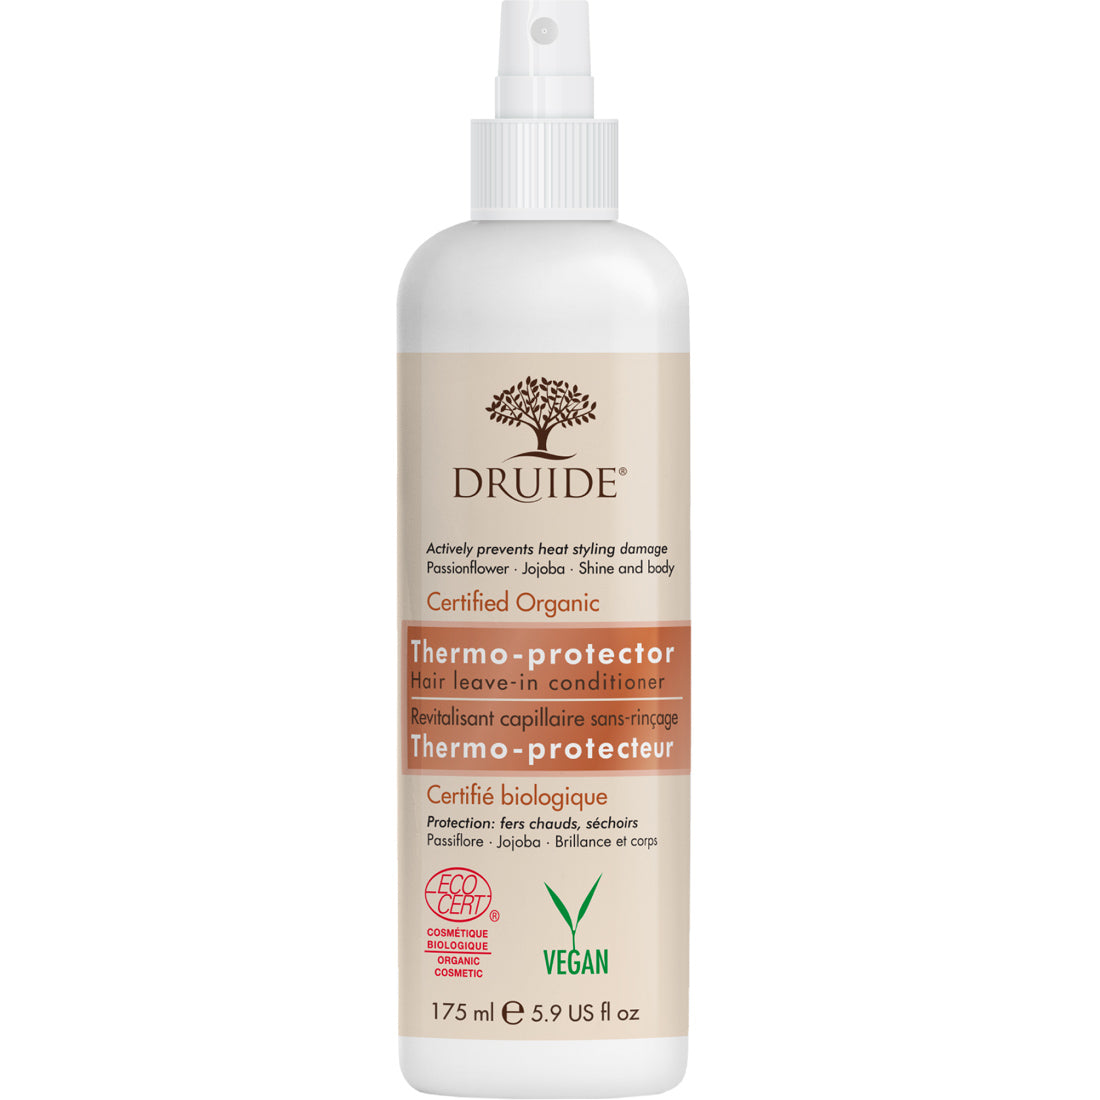 Druide Thermo-Protector Hair Leave-in Conditioner, 175ml